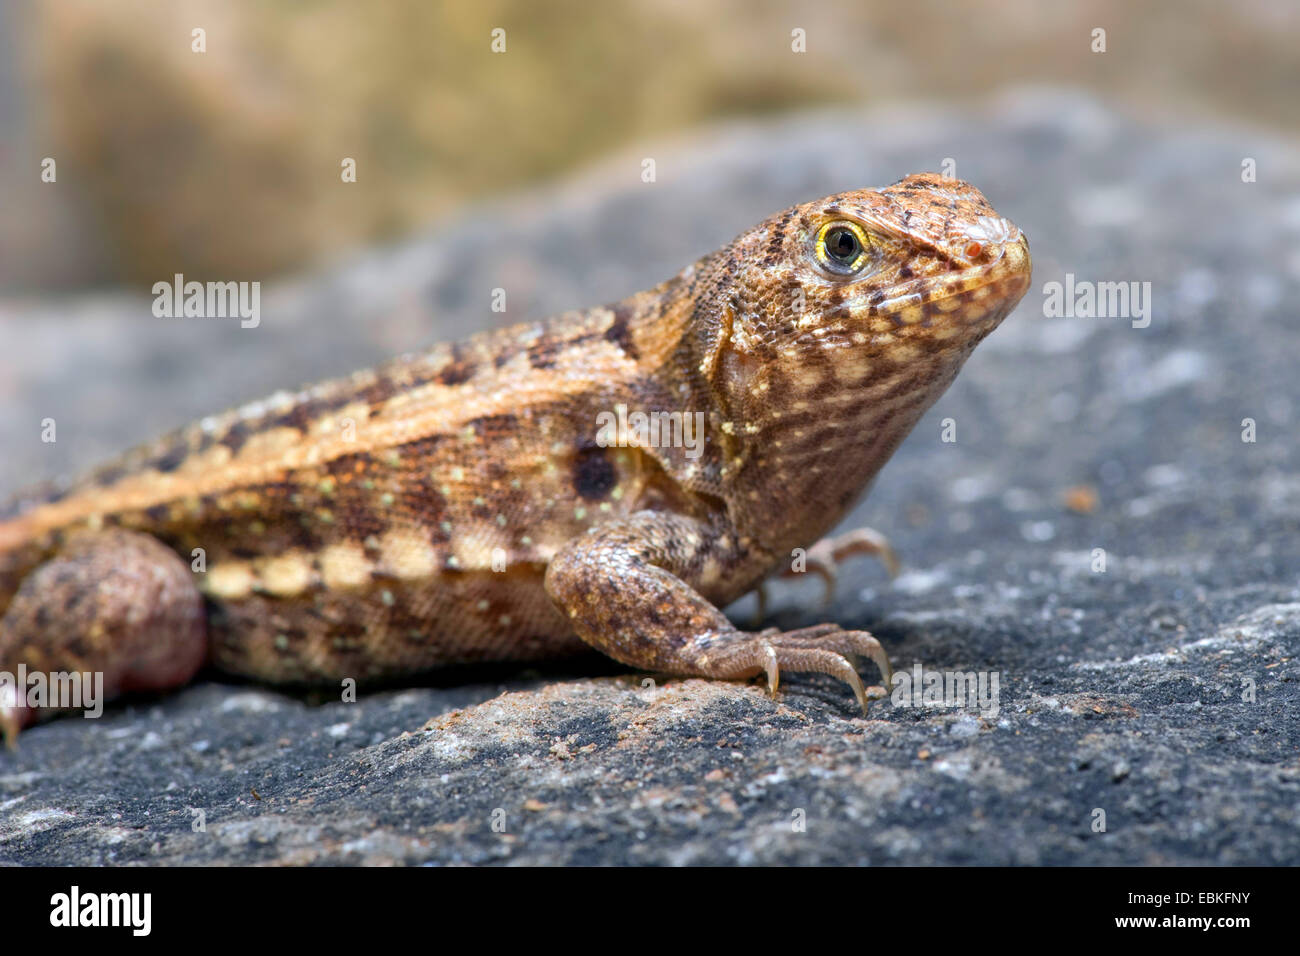 Red-sided curlytail lizard, Haitian curly-tail (Leiocephalus schreibersii), female Stock Photo